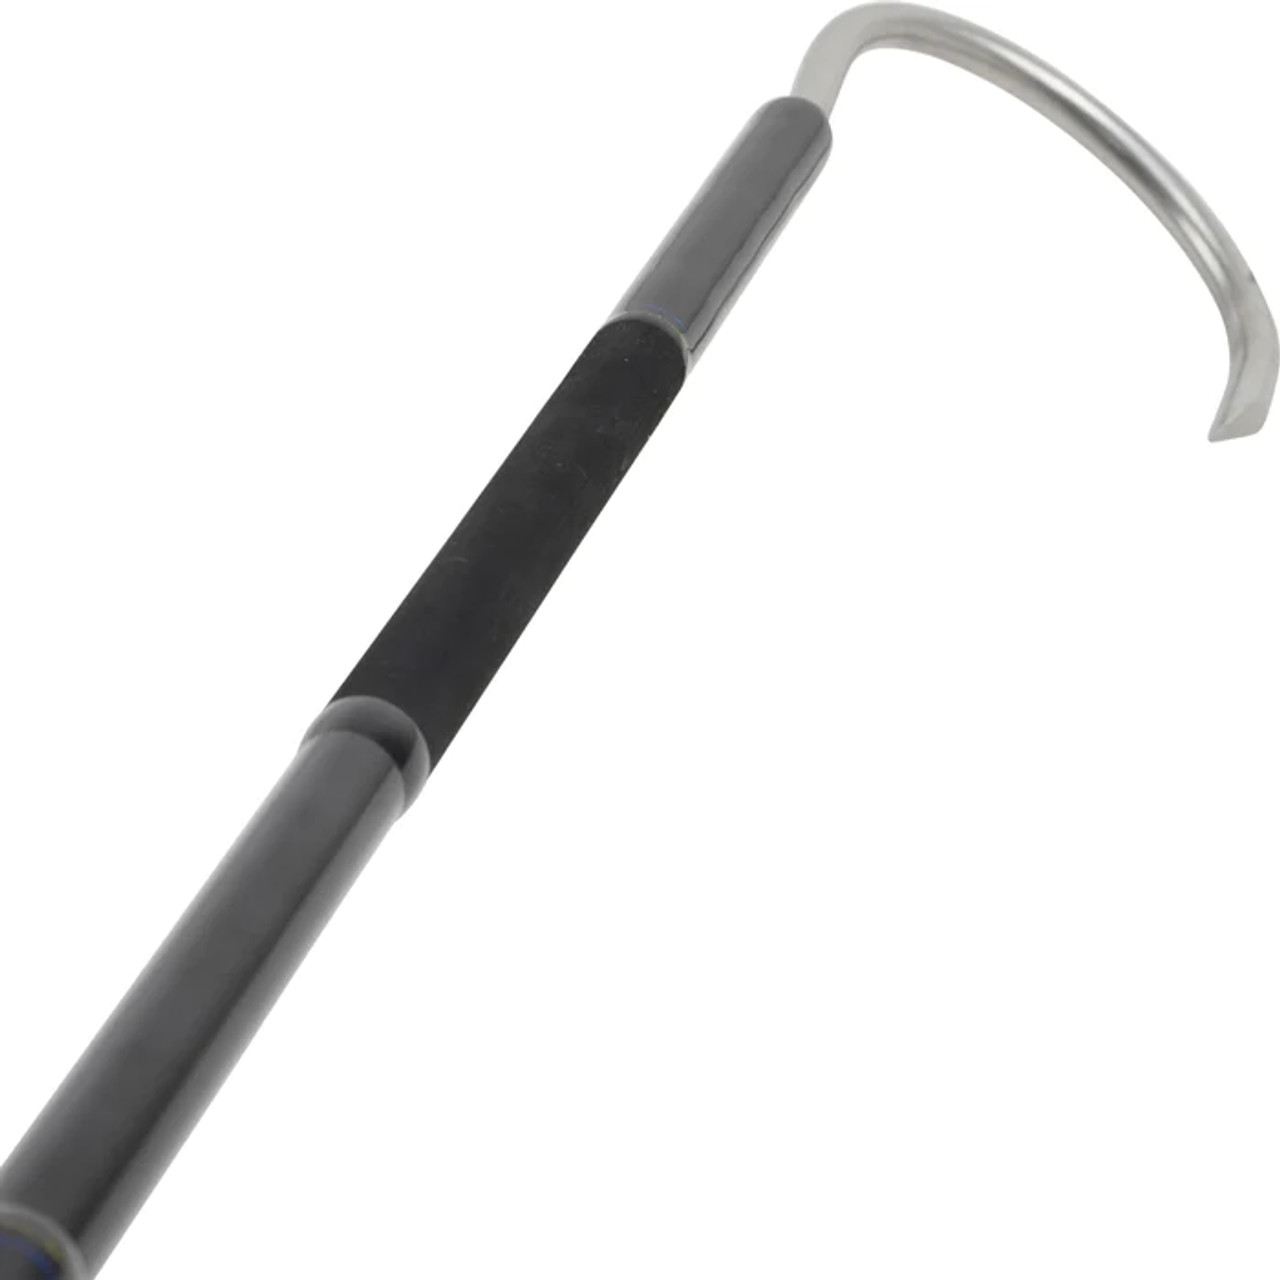 Line Wizard Super Spooler from Alltackle.com - The Hull Truth